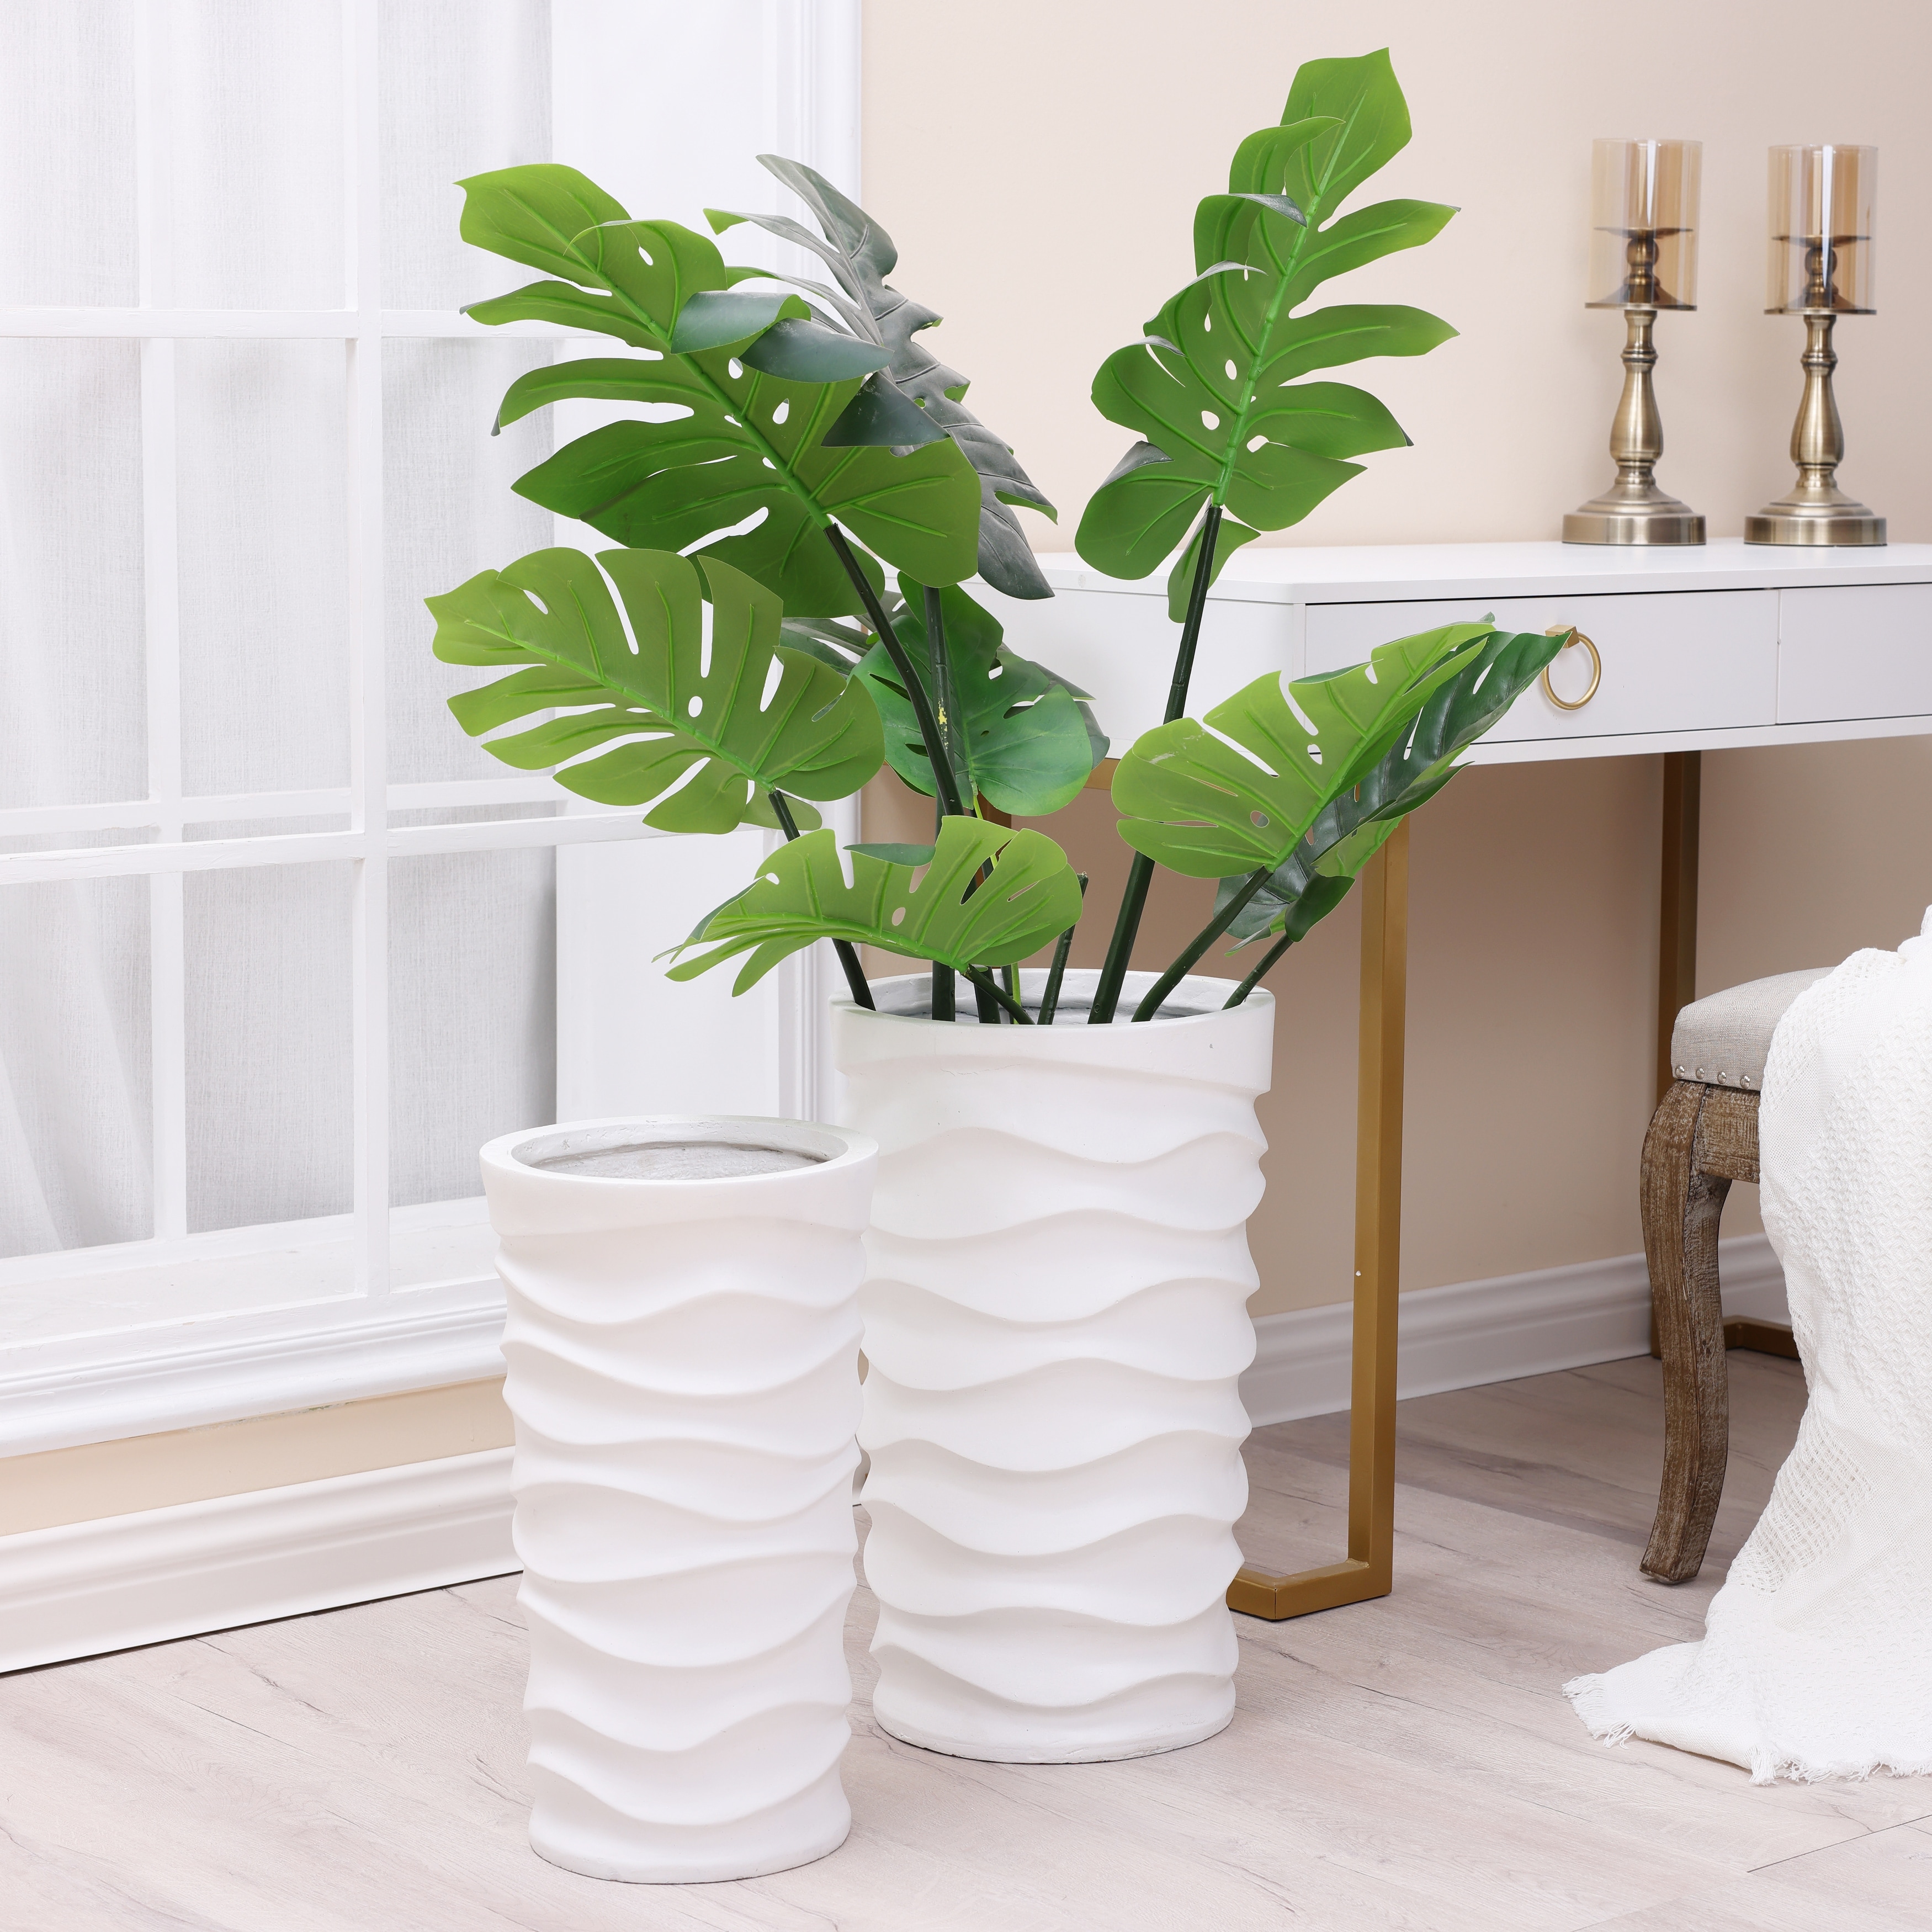 https://ak1.ostkcdn.com/images/products/is/images/direct/52ba3fc8b571ab8b504b169c637bb3f768960d93/Reyis-White-Wavy-Modern-2-piece-Handmade-Planter-Set-by-Havenside-Home.jpg